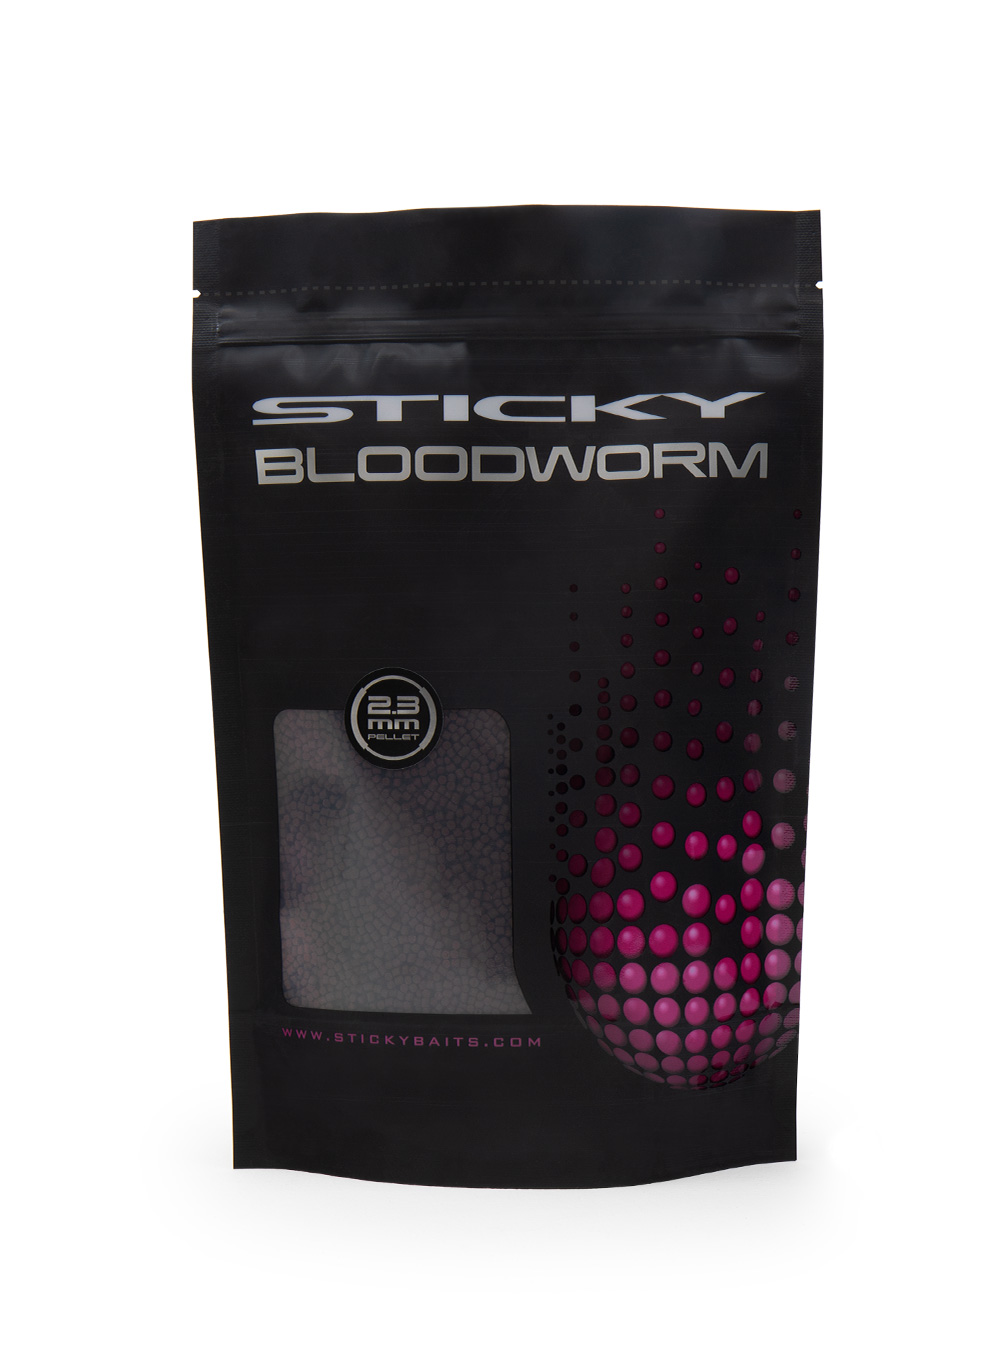 Sticky Baits - Products - Bloodworm Pellets - Carp Fishing Bait